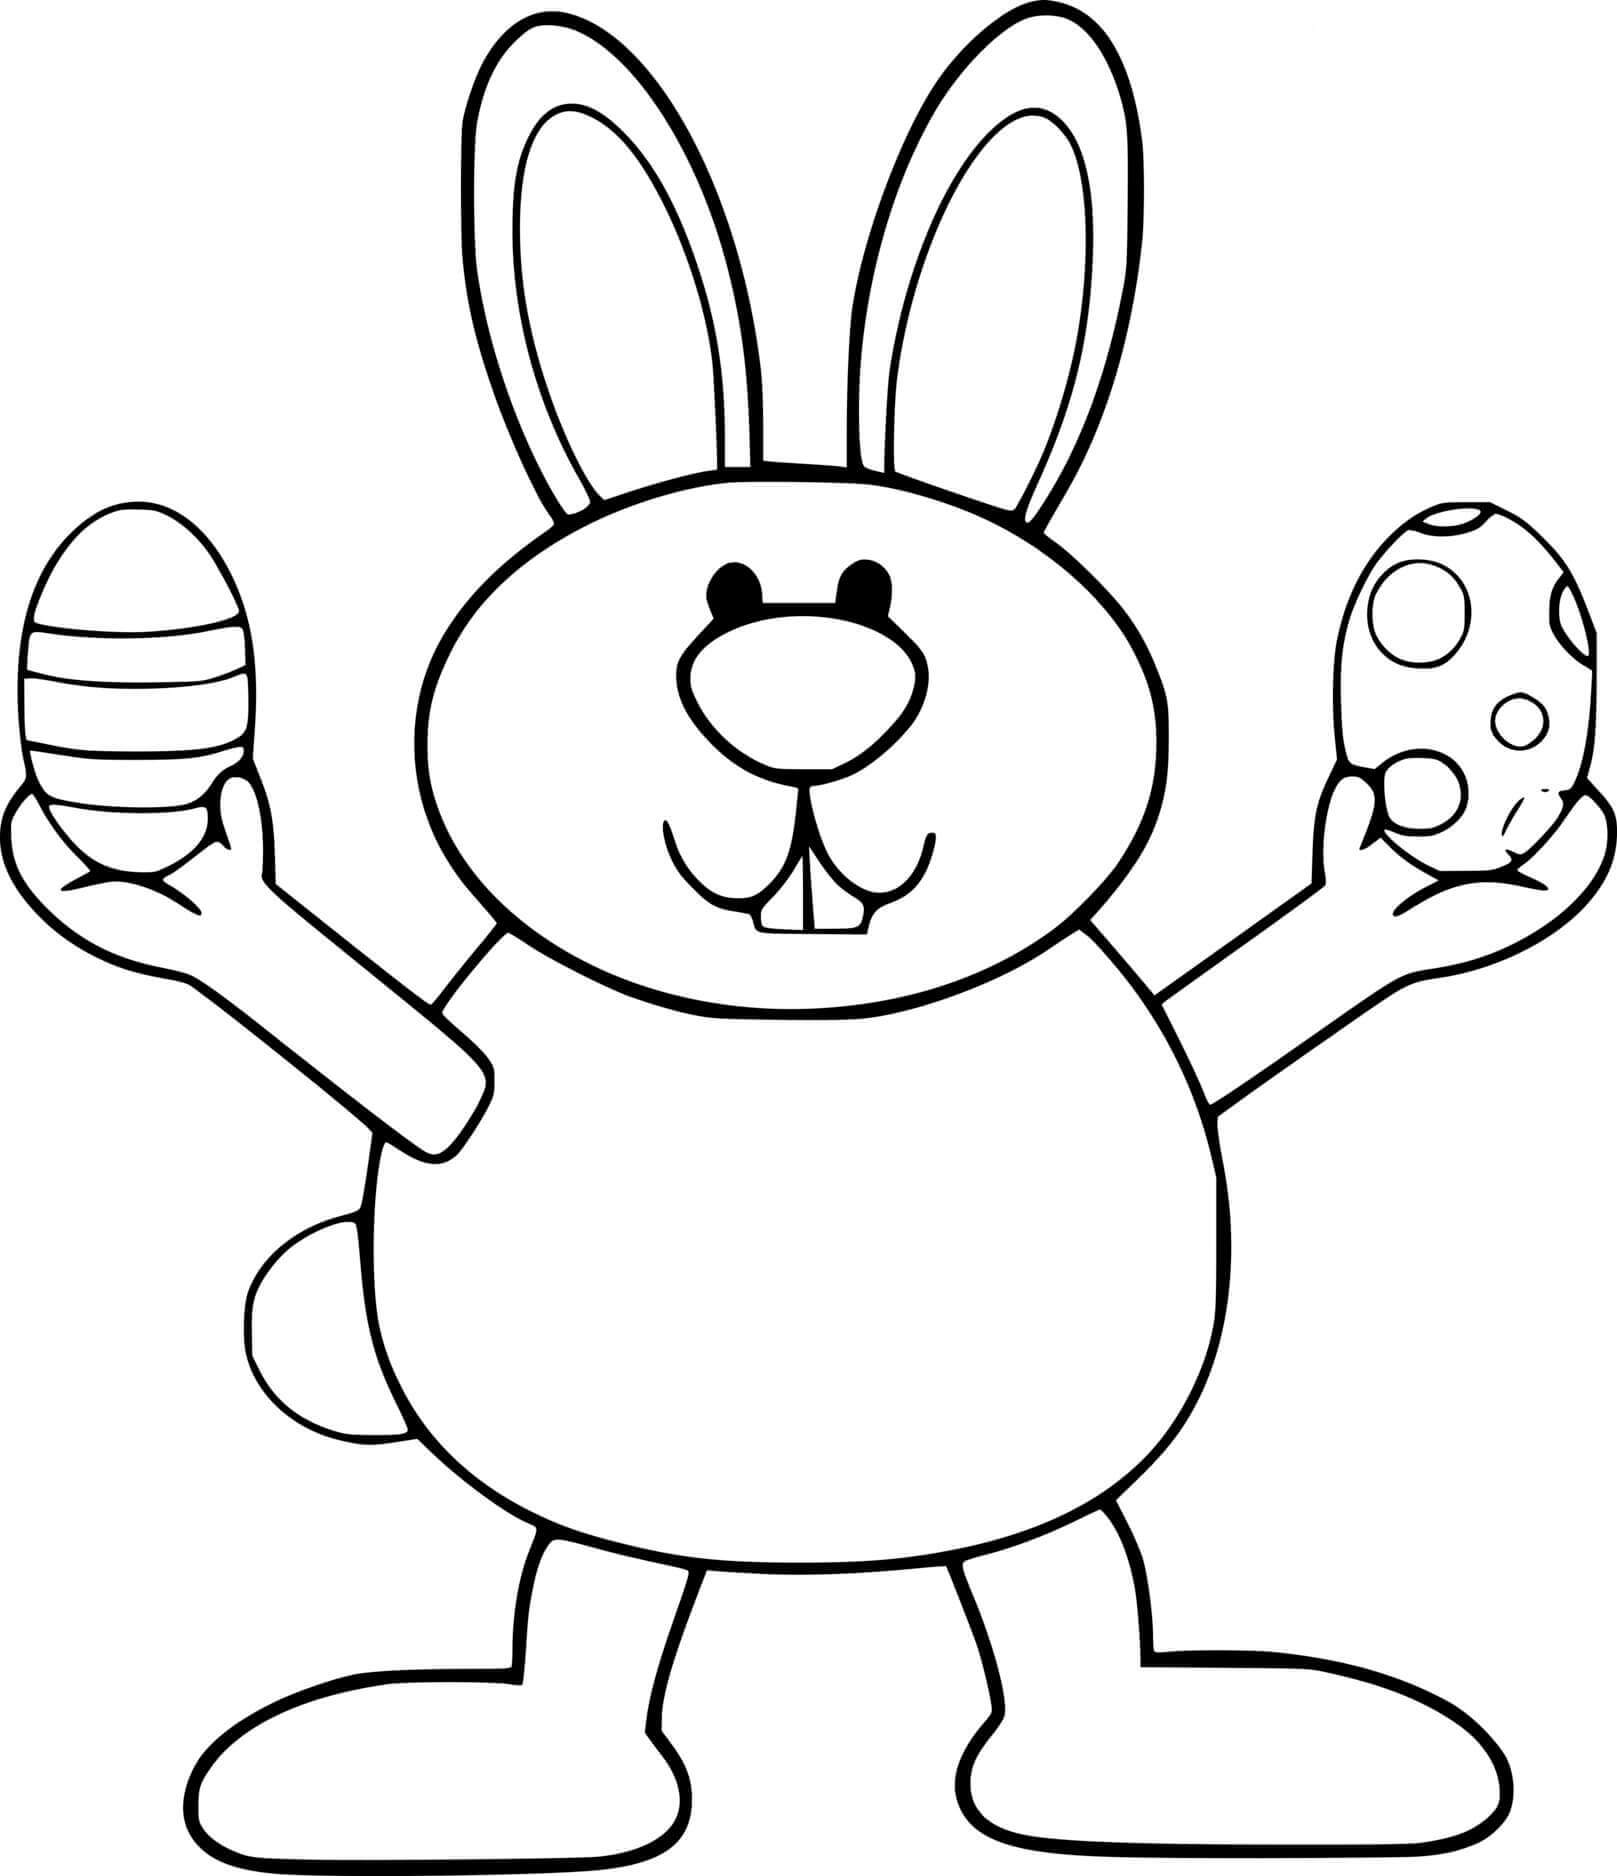 Easter Bunny Holds Two Eggs Coloring Page